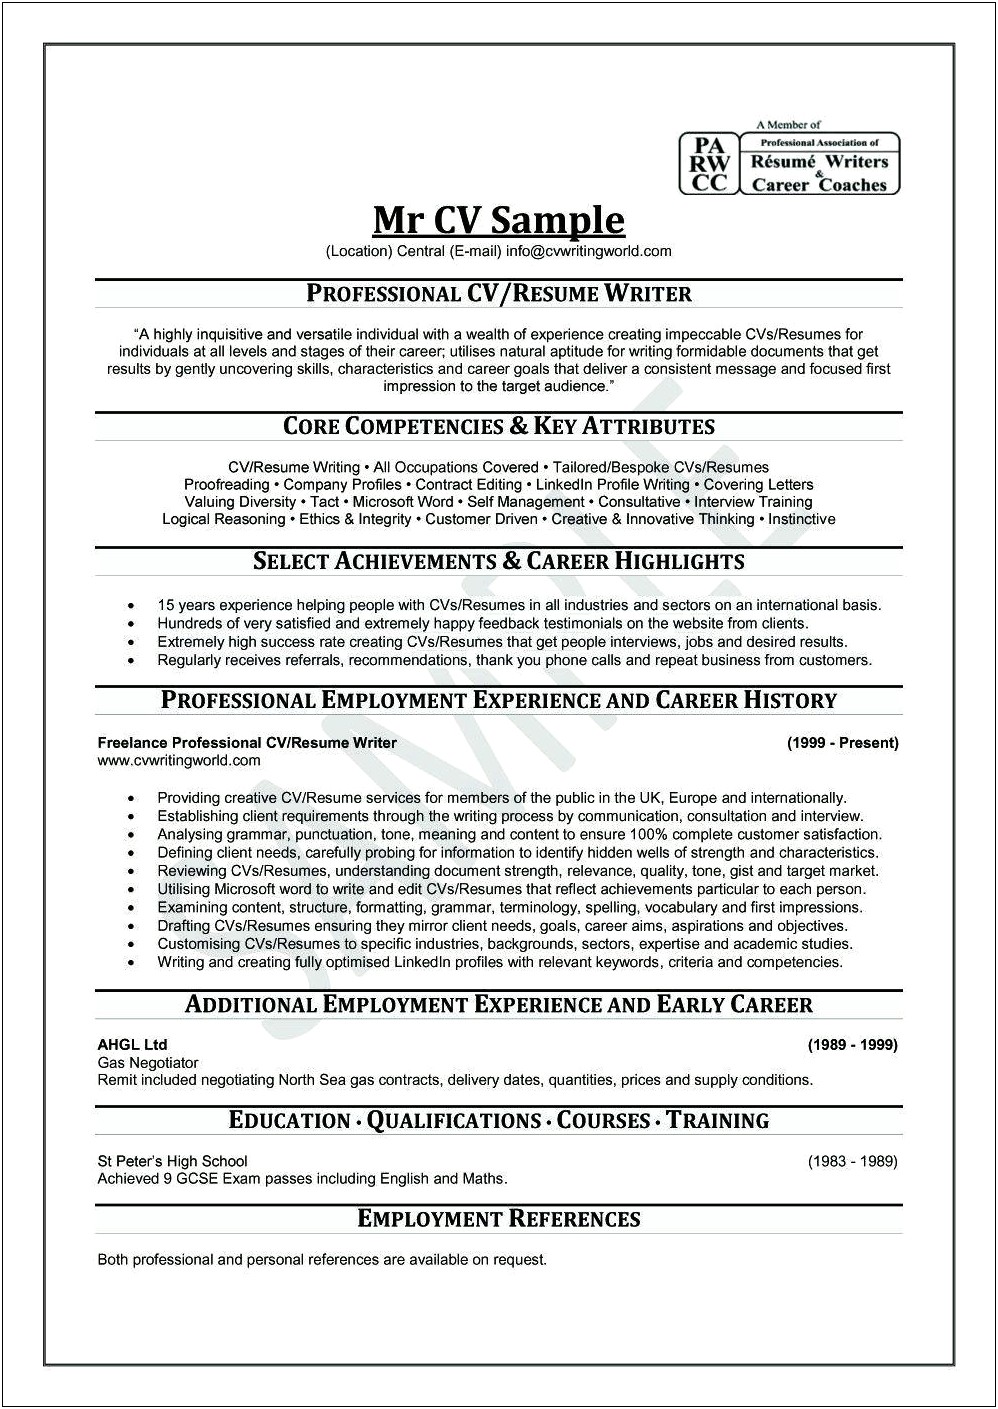 Resume Writing Services Years Of Experience